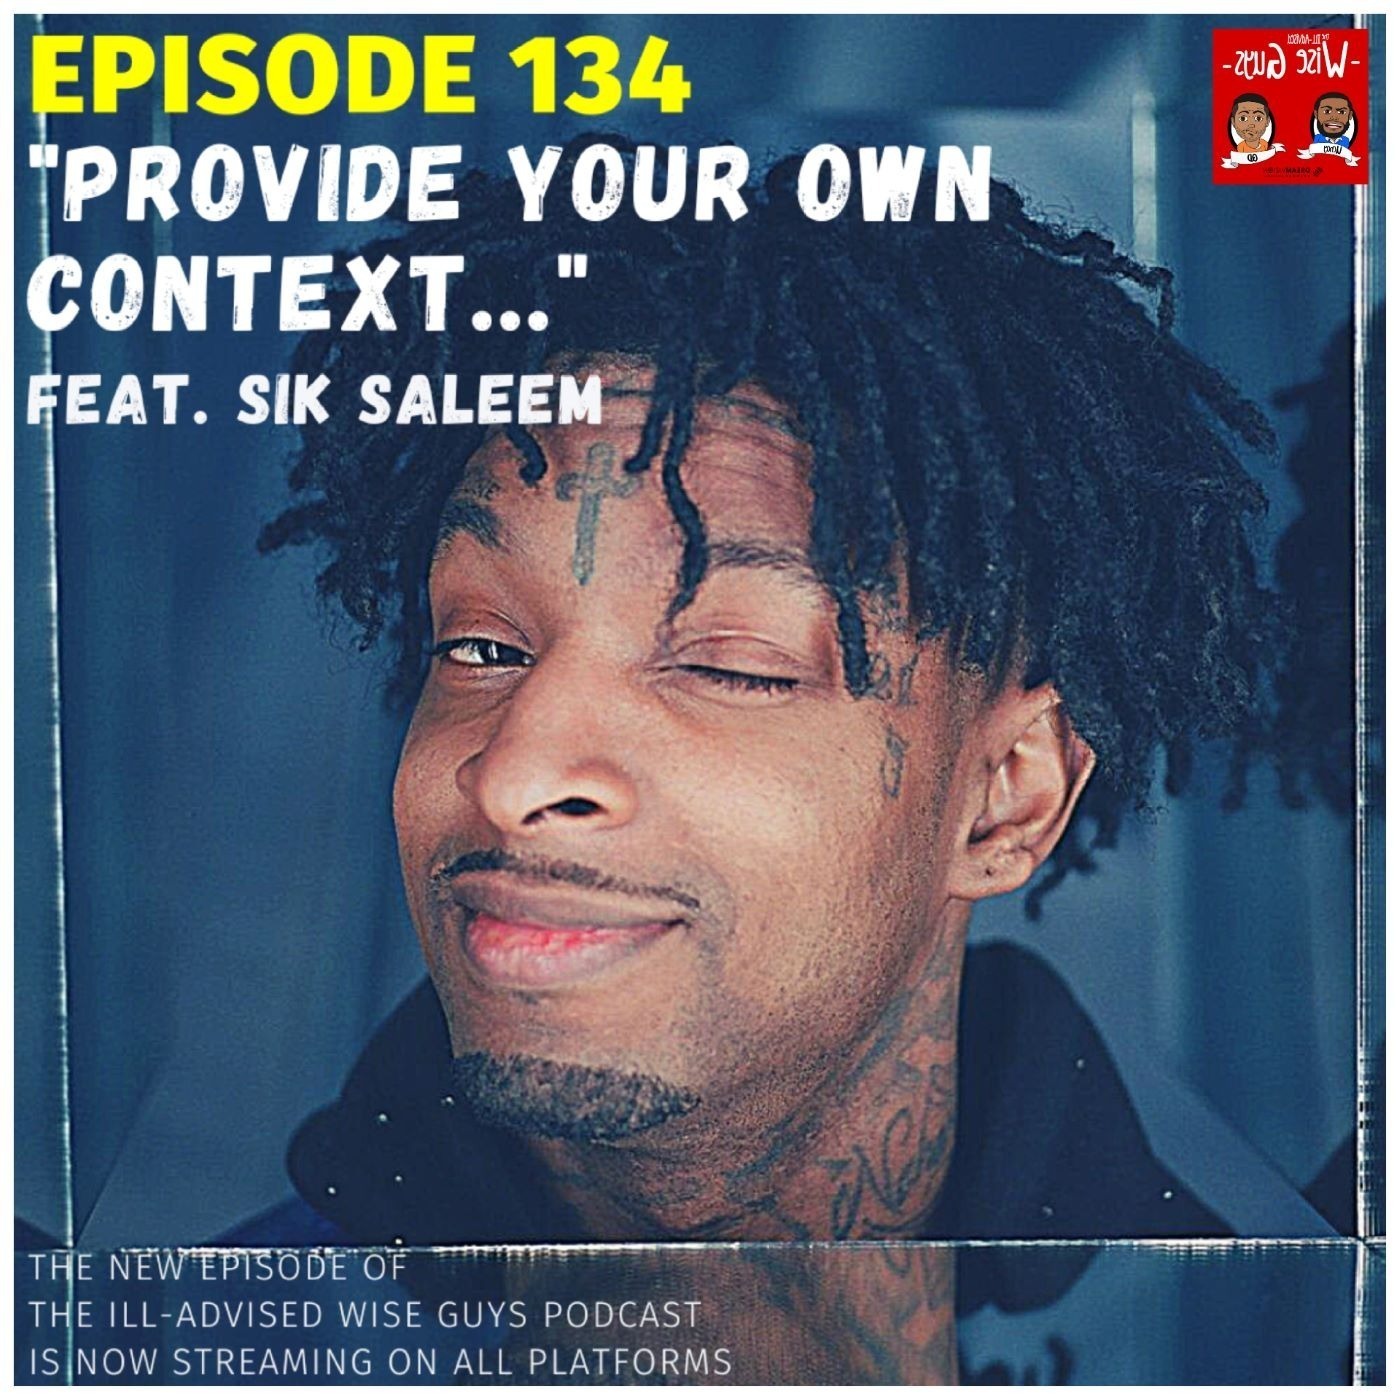 Episode 134 - "Provide Your Own Context..." (Feat. Sik Saleem) Image